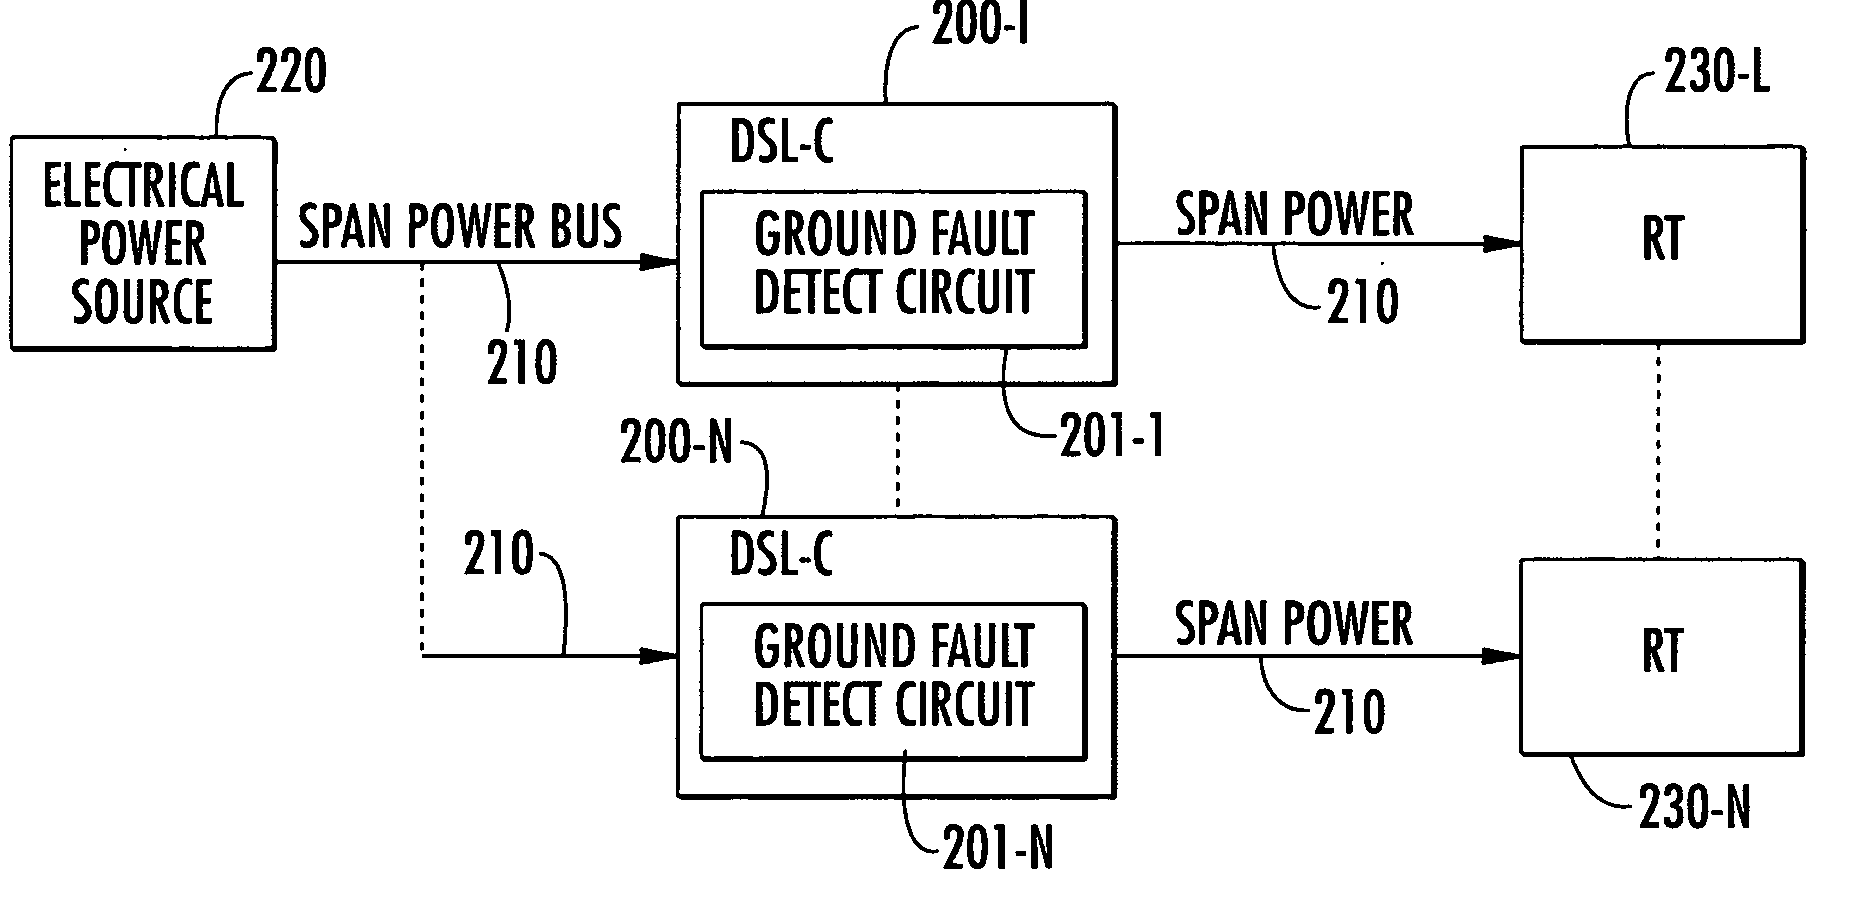 Technique for independent ground fault detection of multiple twisted pair telephone lines connected to a common electrical power source